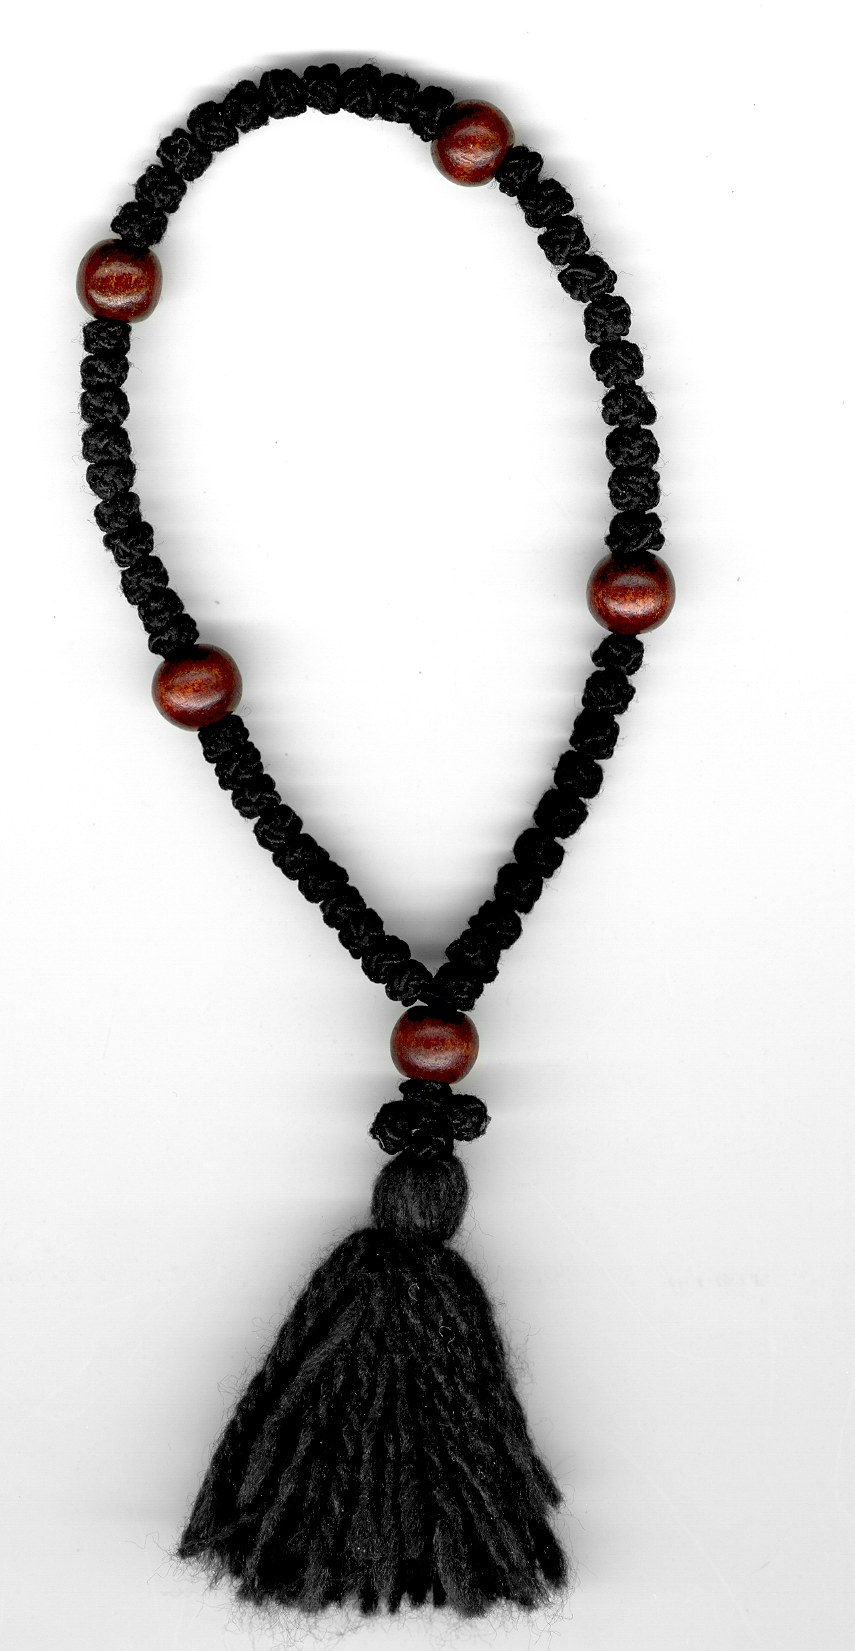 Orthodox Prayer Rope Black Color with 100 Knots and Wooden Beads